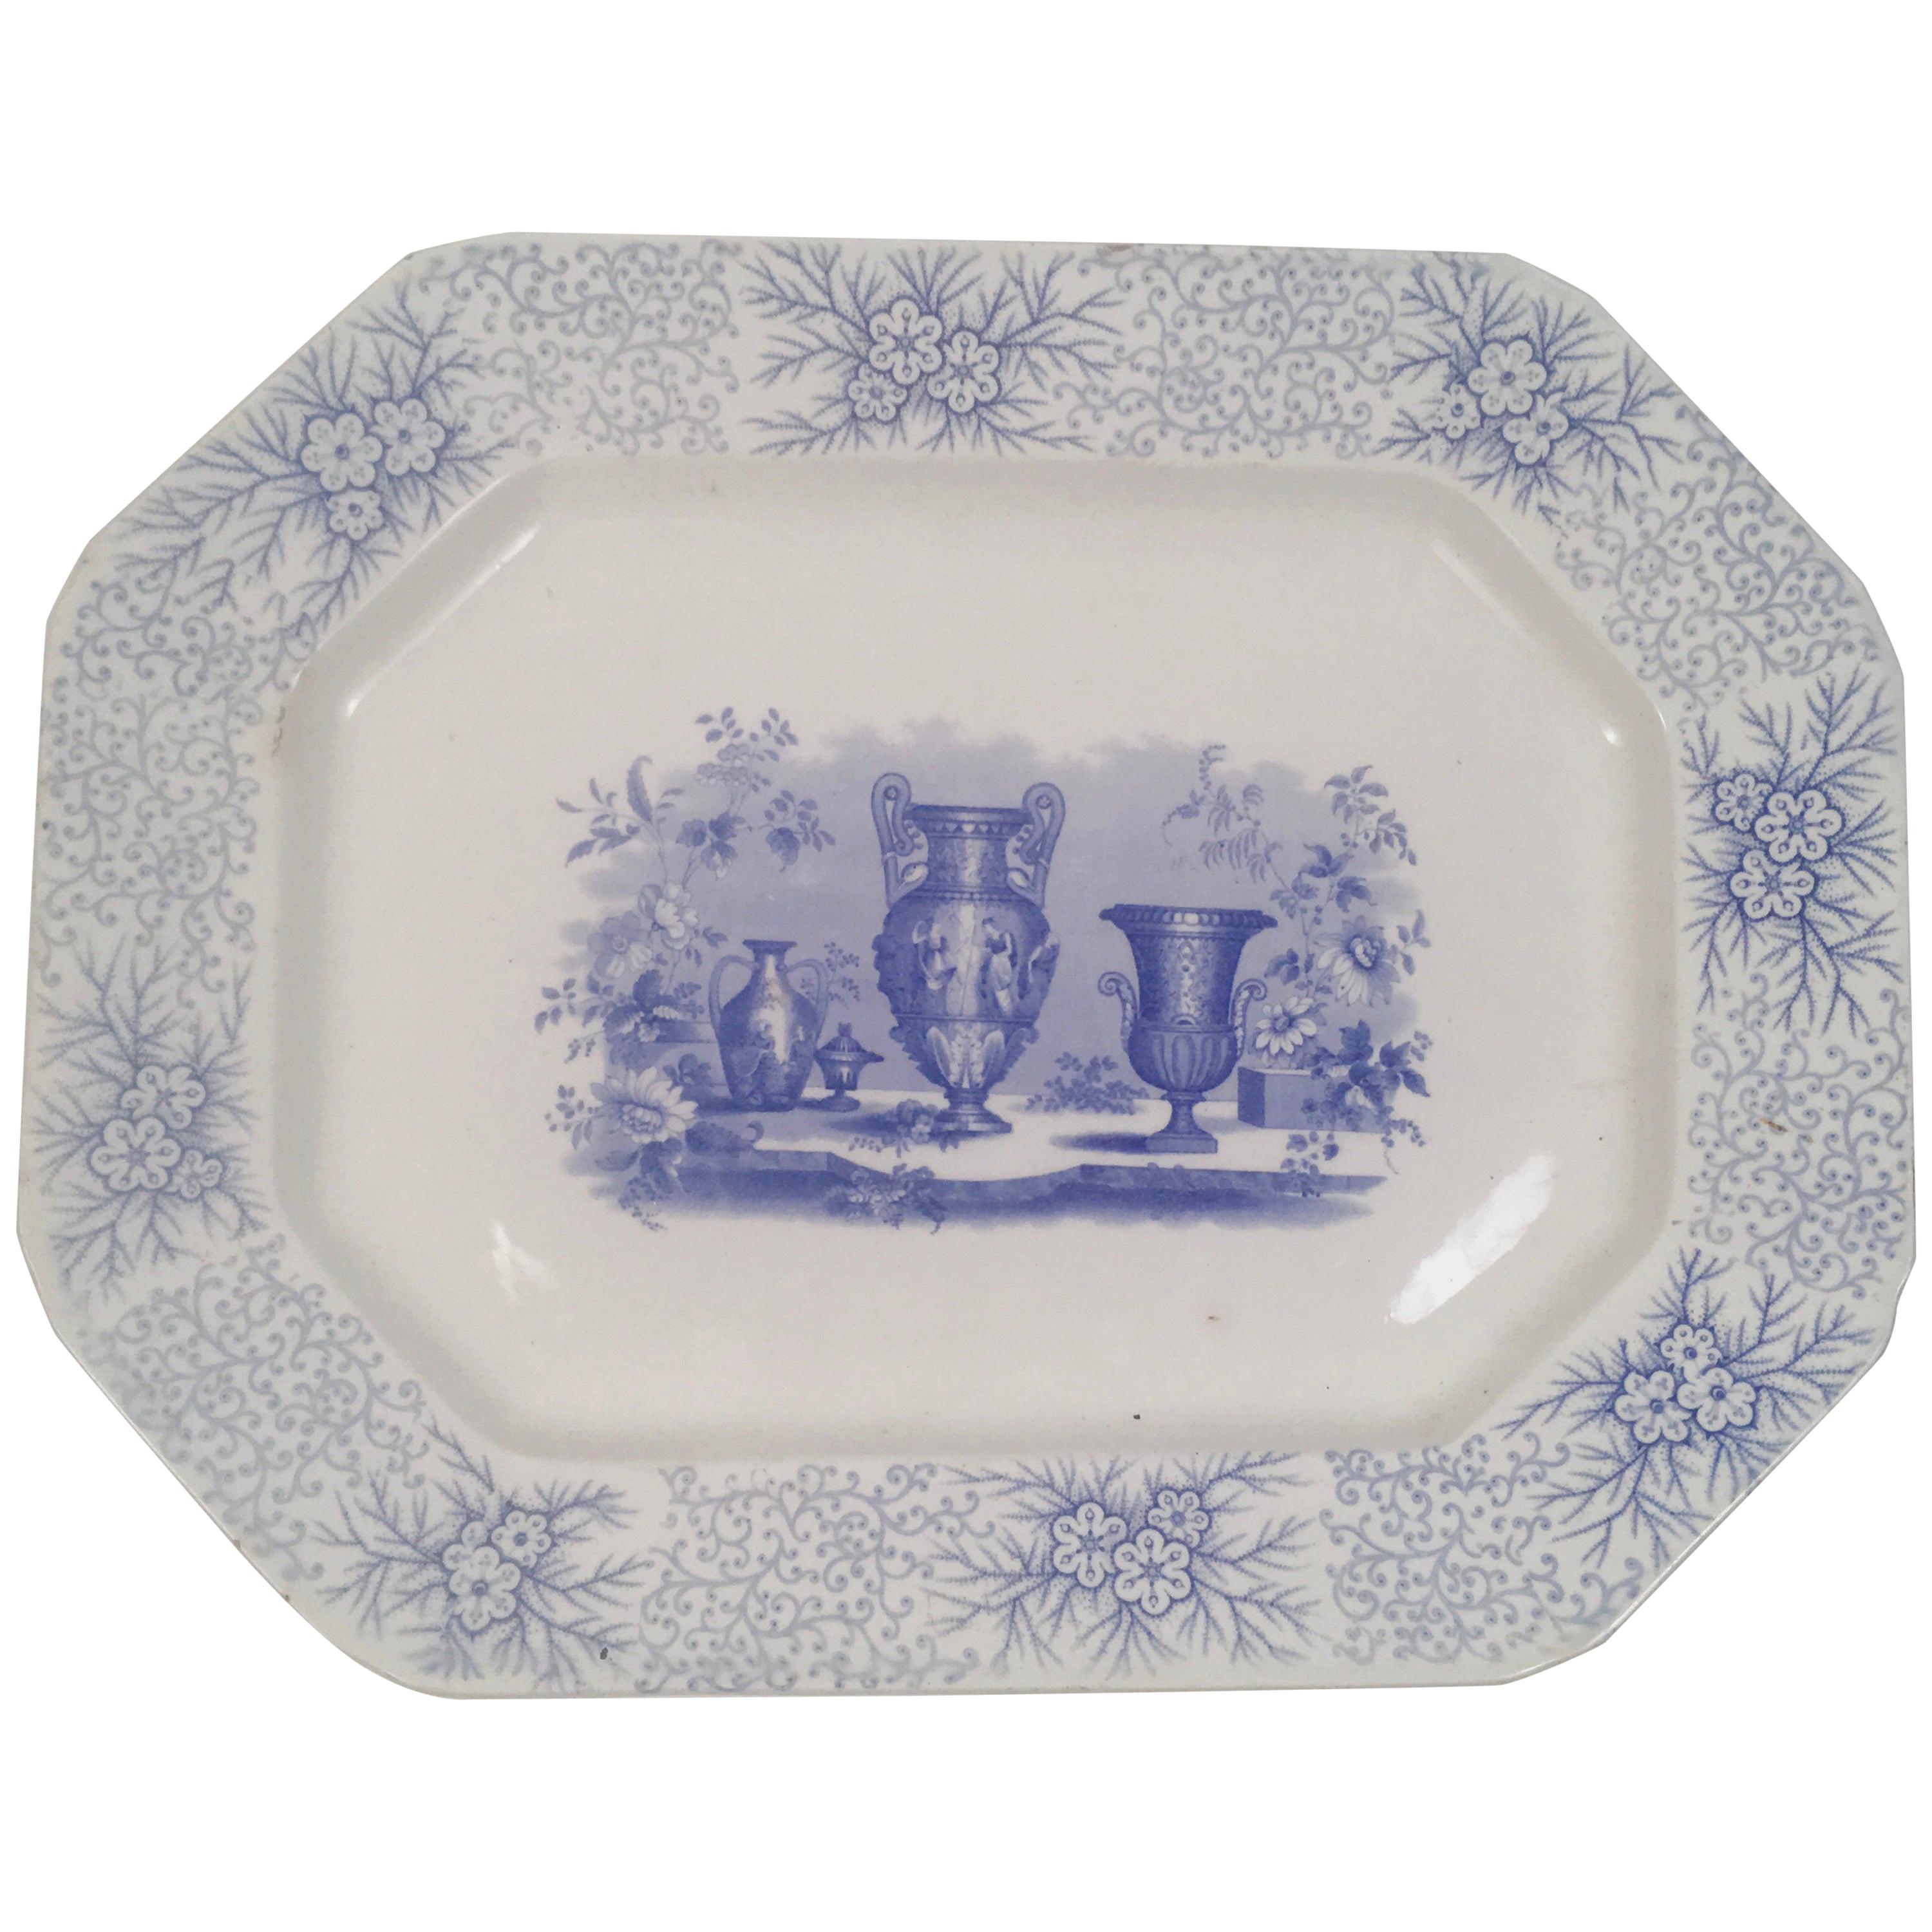 Blue and White Neoclassical Staffordshire Platter with Provenance